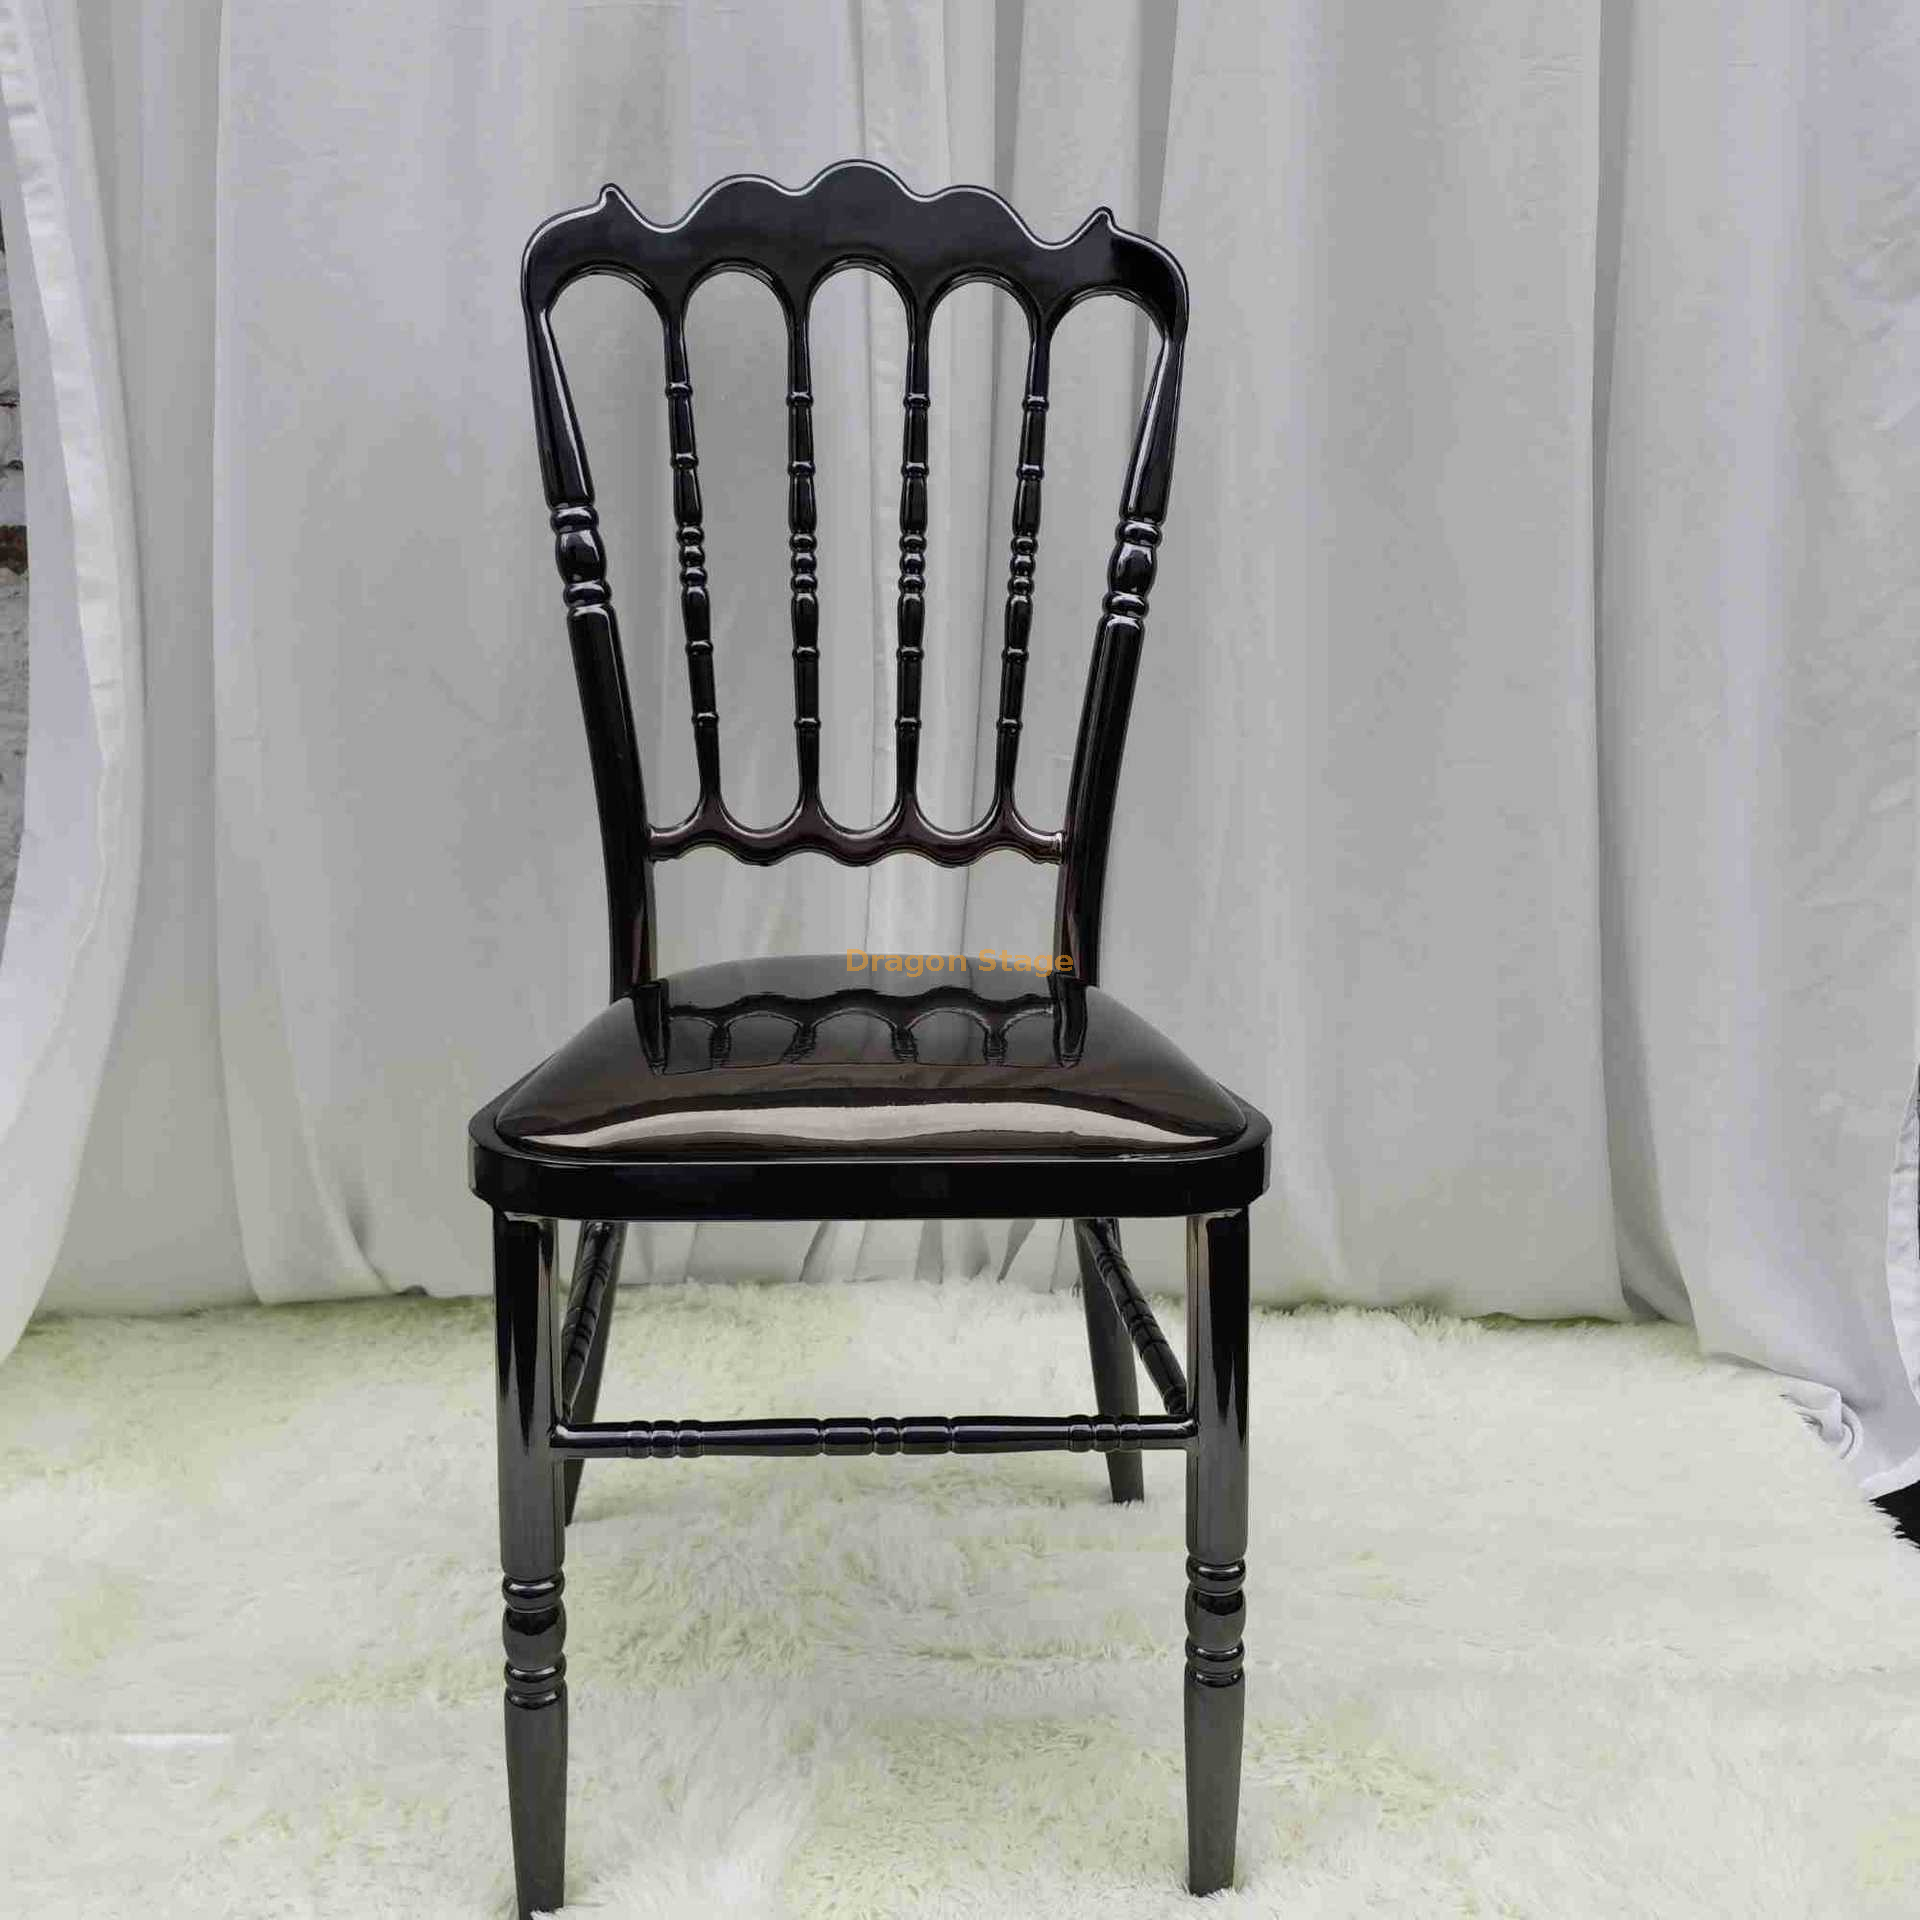 Metal Castle Chairs, Electroplated Bamboo Chairs, Soft Cushion Dining Chairs, Hotel Banquet Chairs, Wedding Chairs, Wholesale Manufacturers